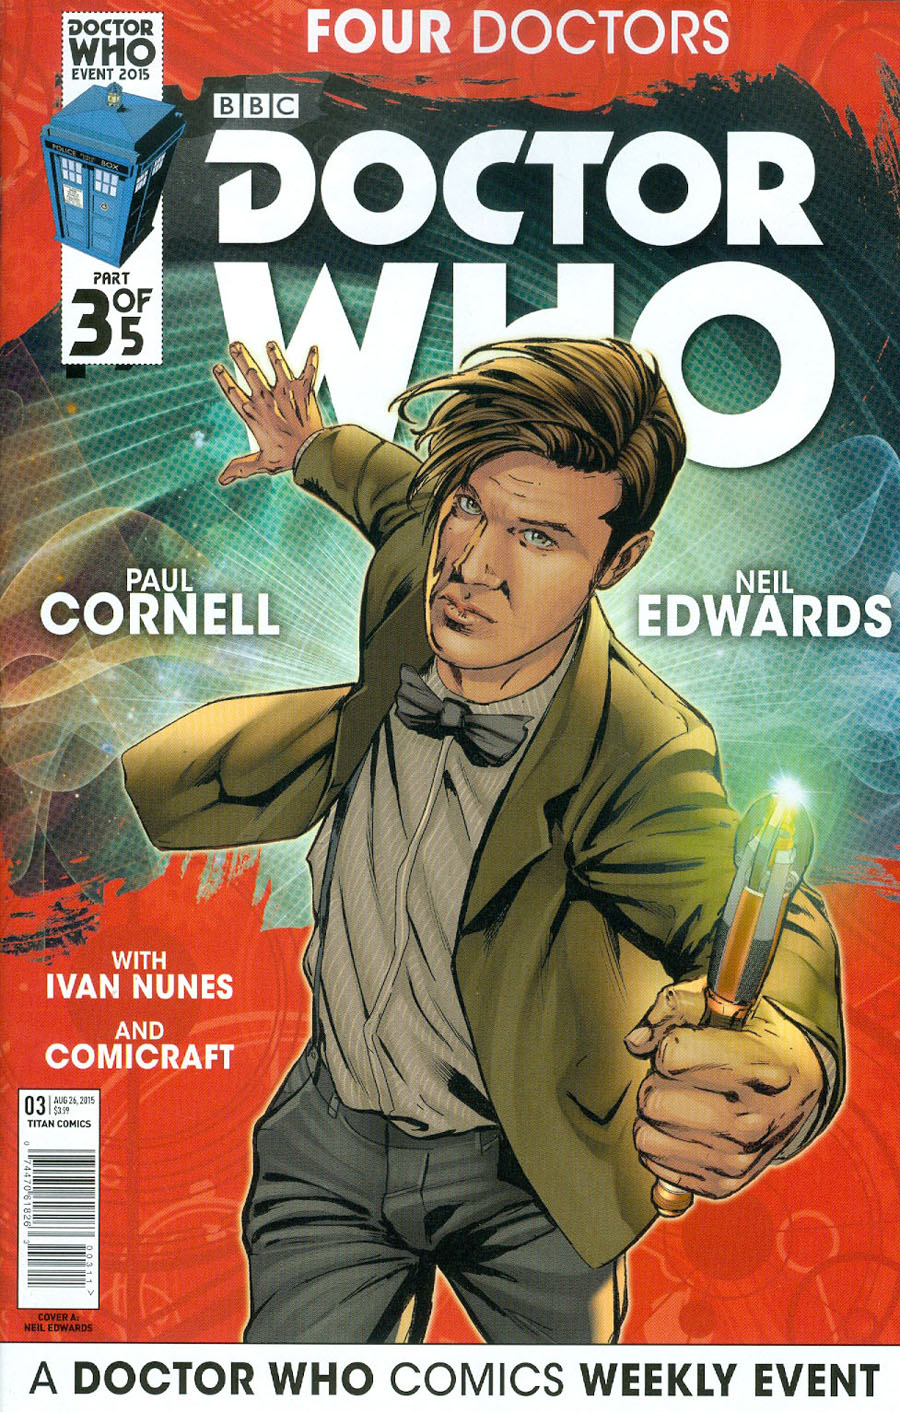 Doctor Who Event 2015 Four Doctors #3 Cover A Regular Neil Edwards Interlinking Doctor Cover